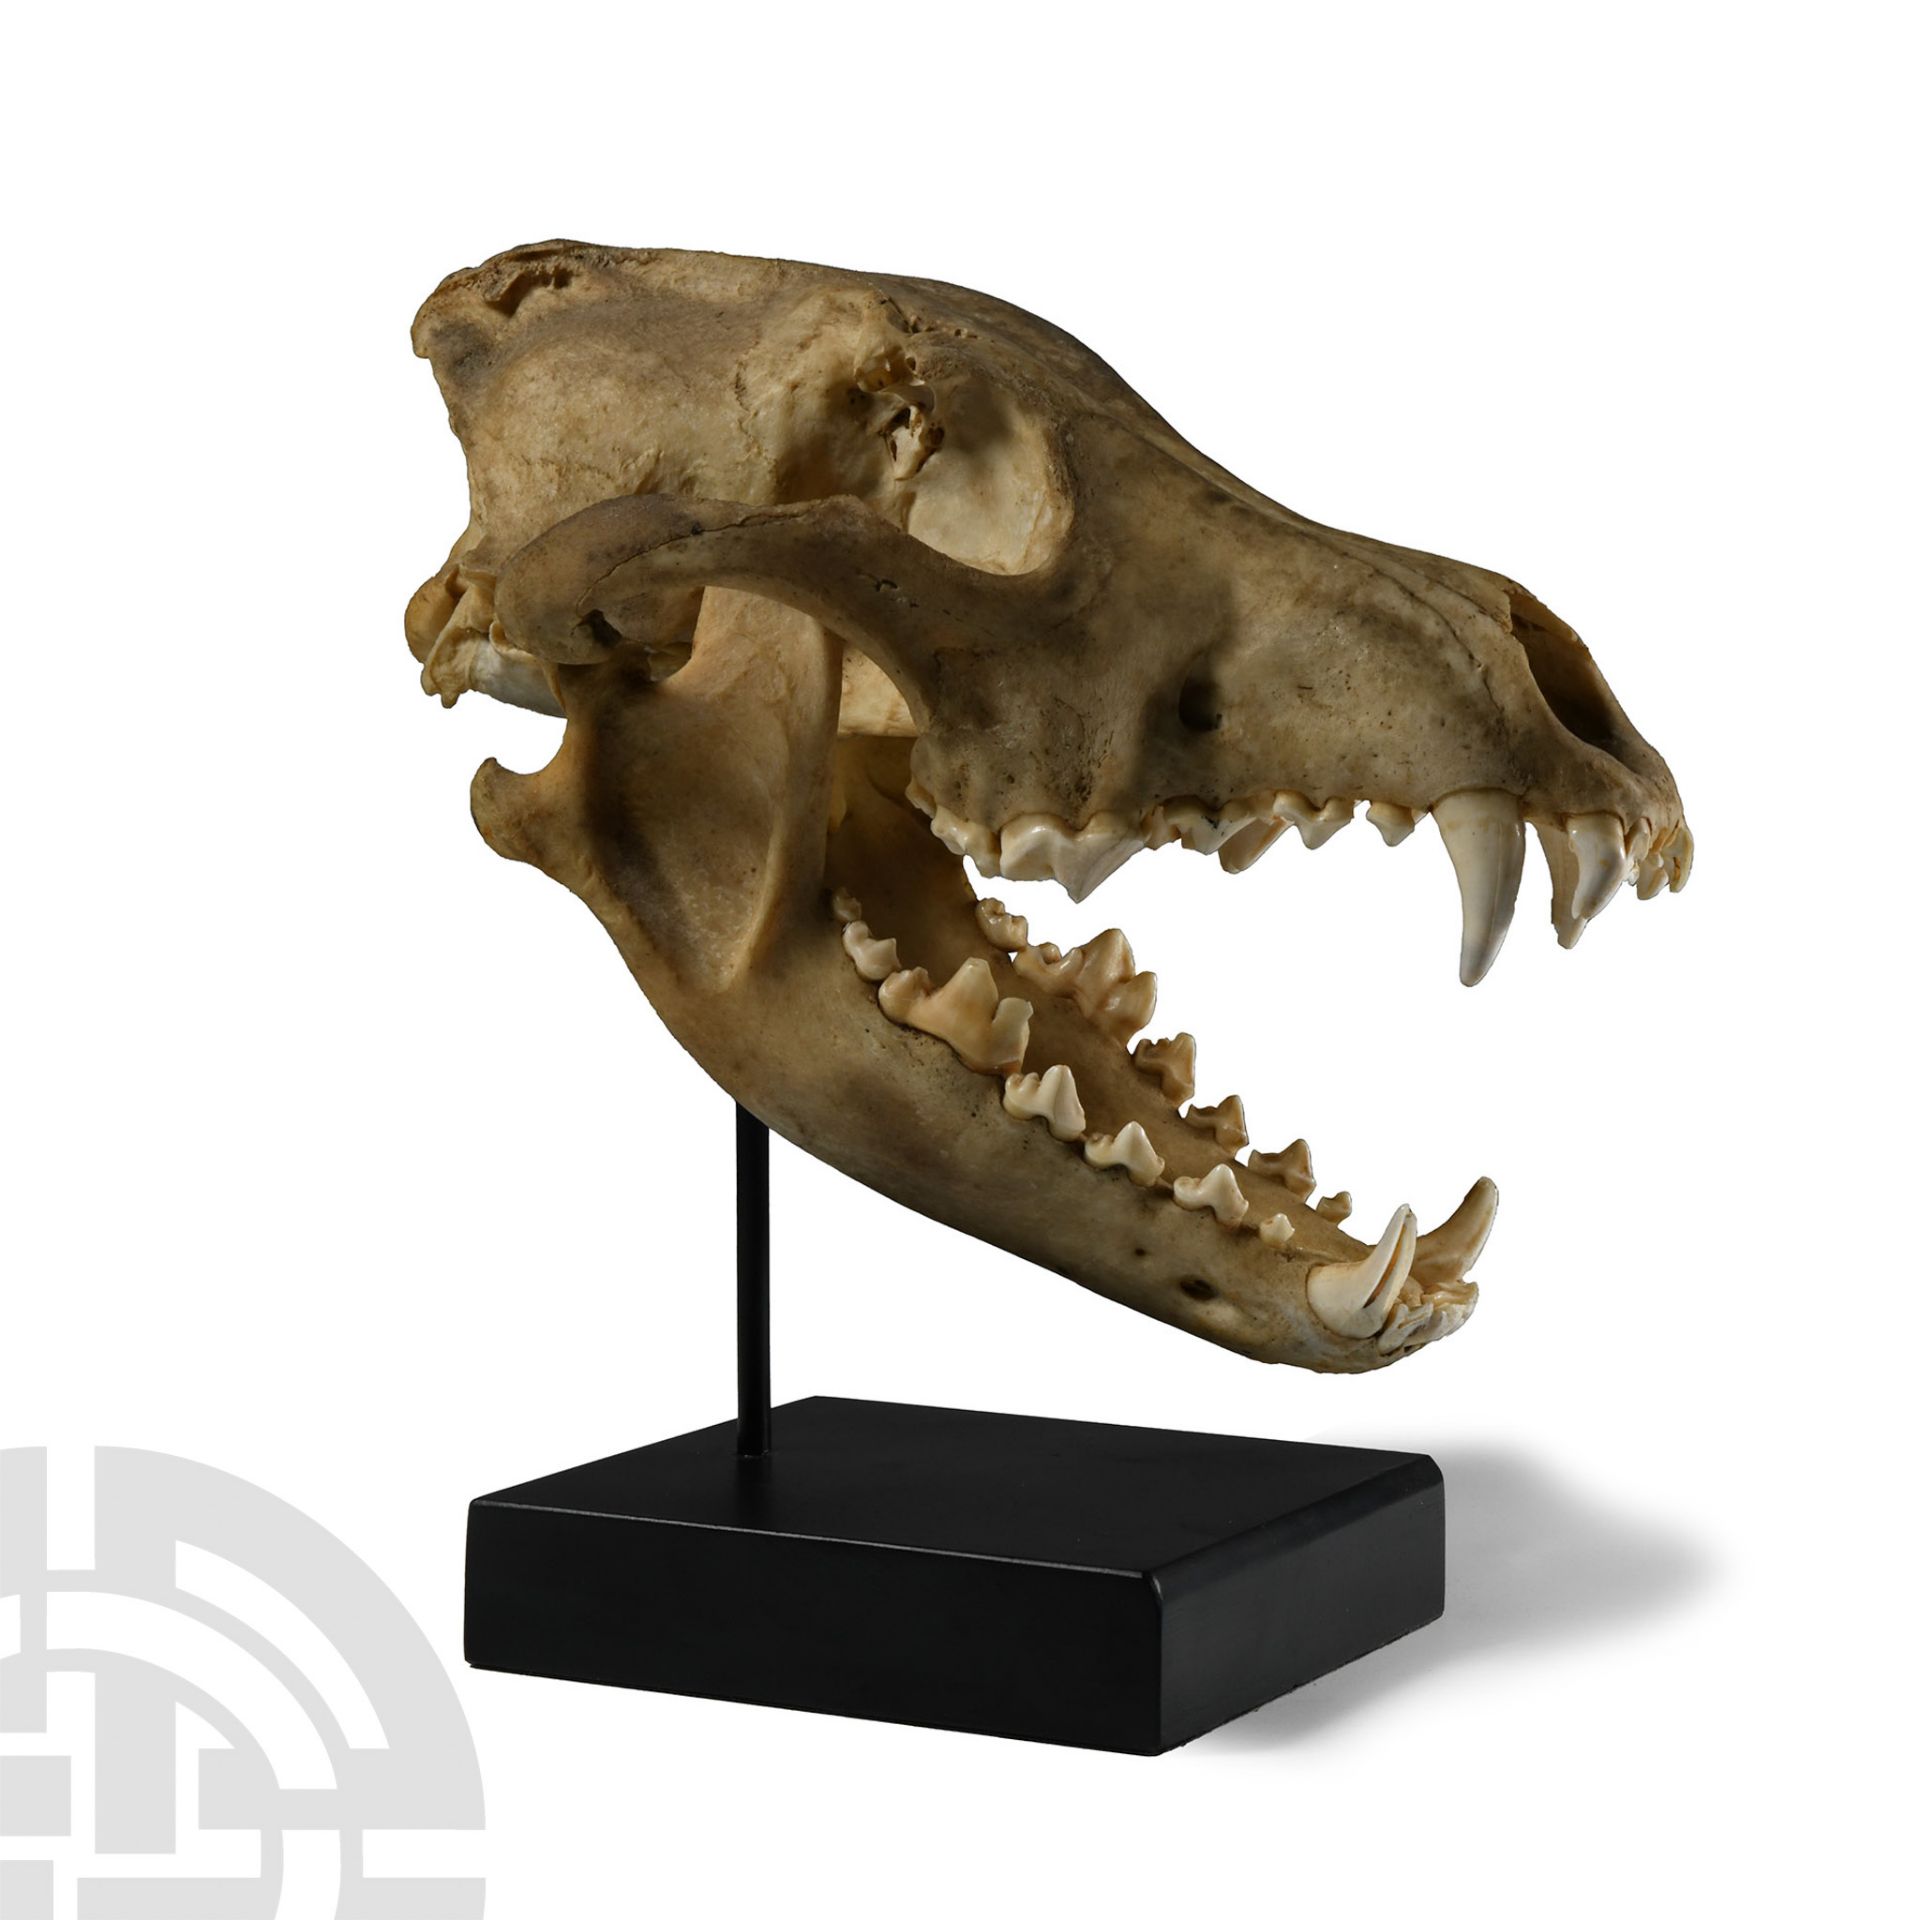 Natural History - Canis Teilhardi Wolf's Skull